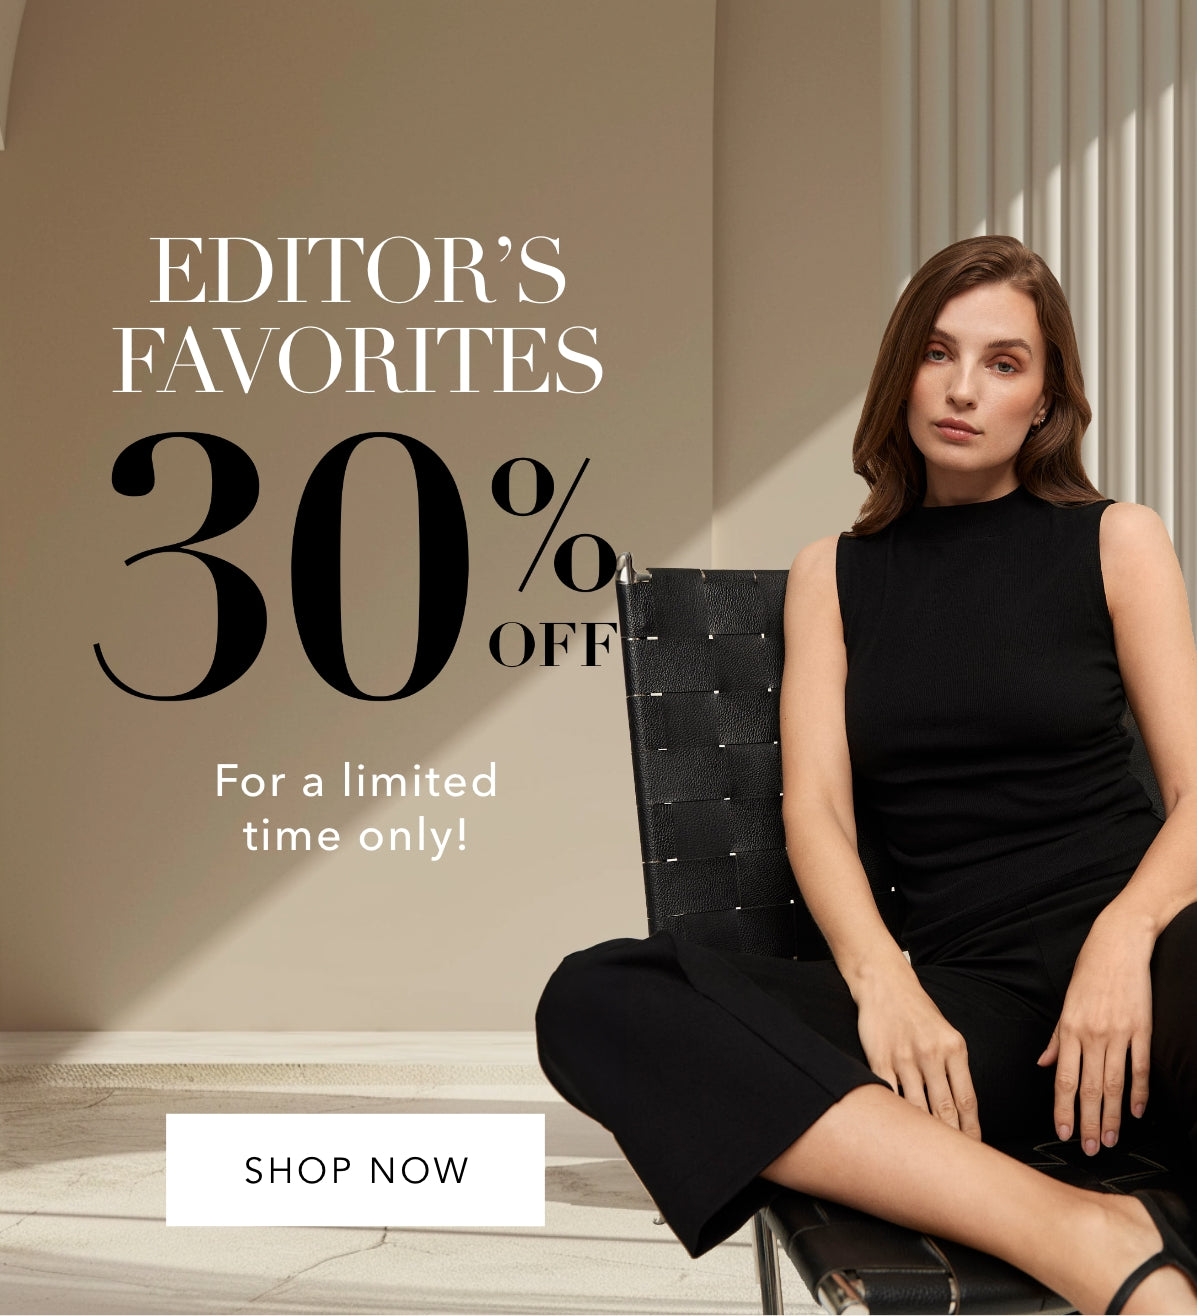 30% off editors favorite sale model sitting on chair wearing black outfit